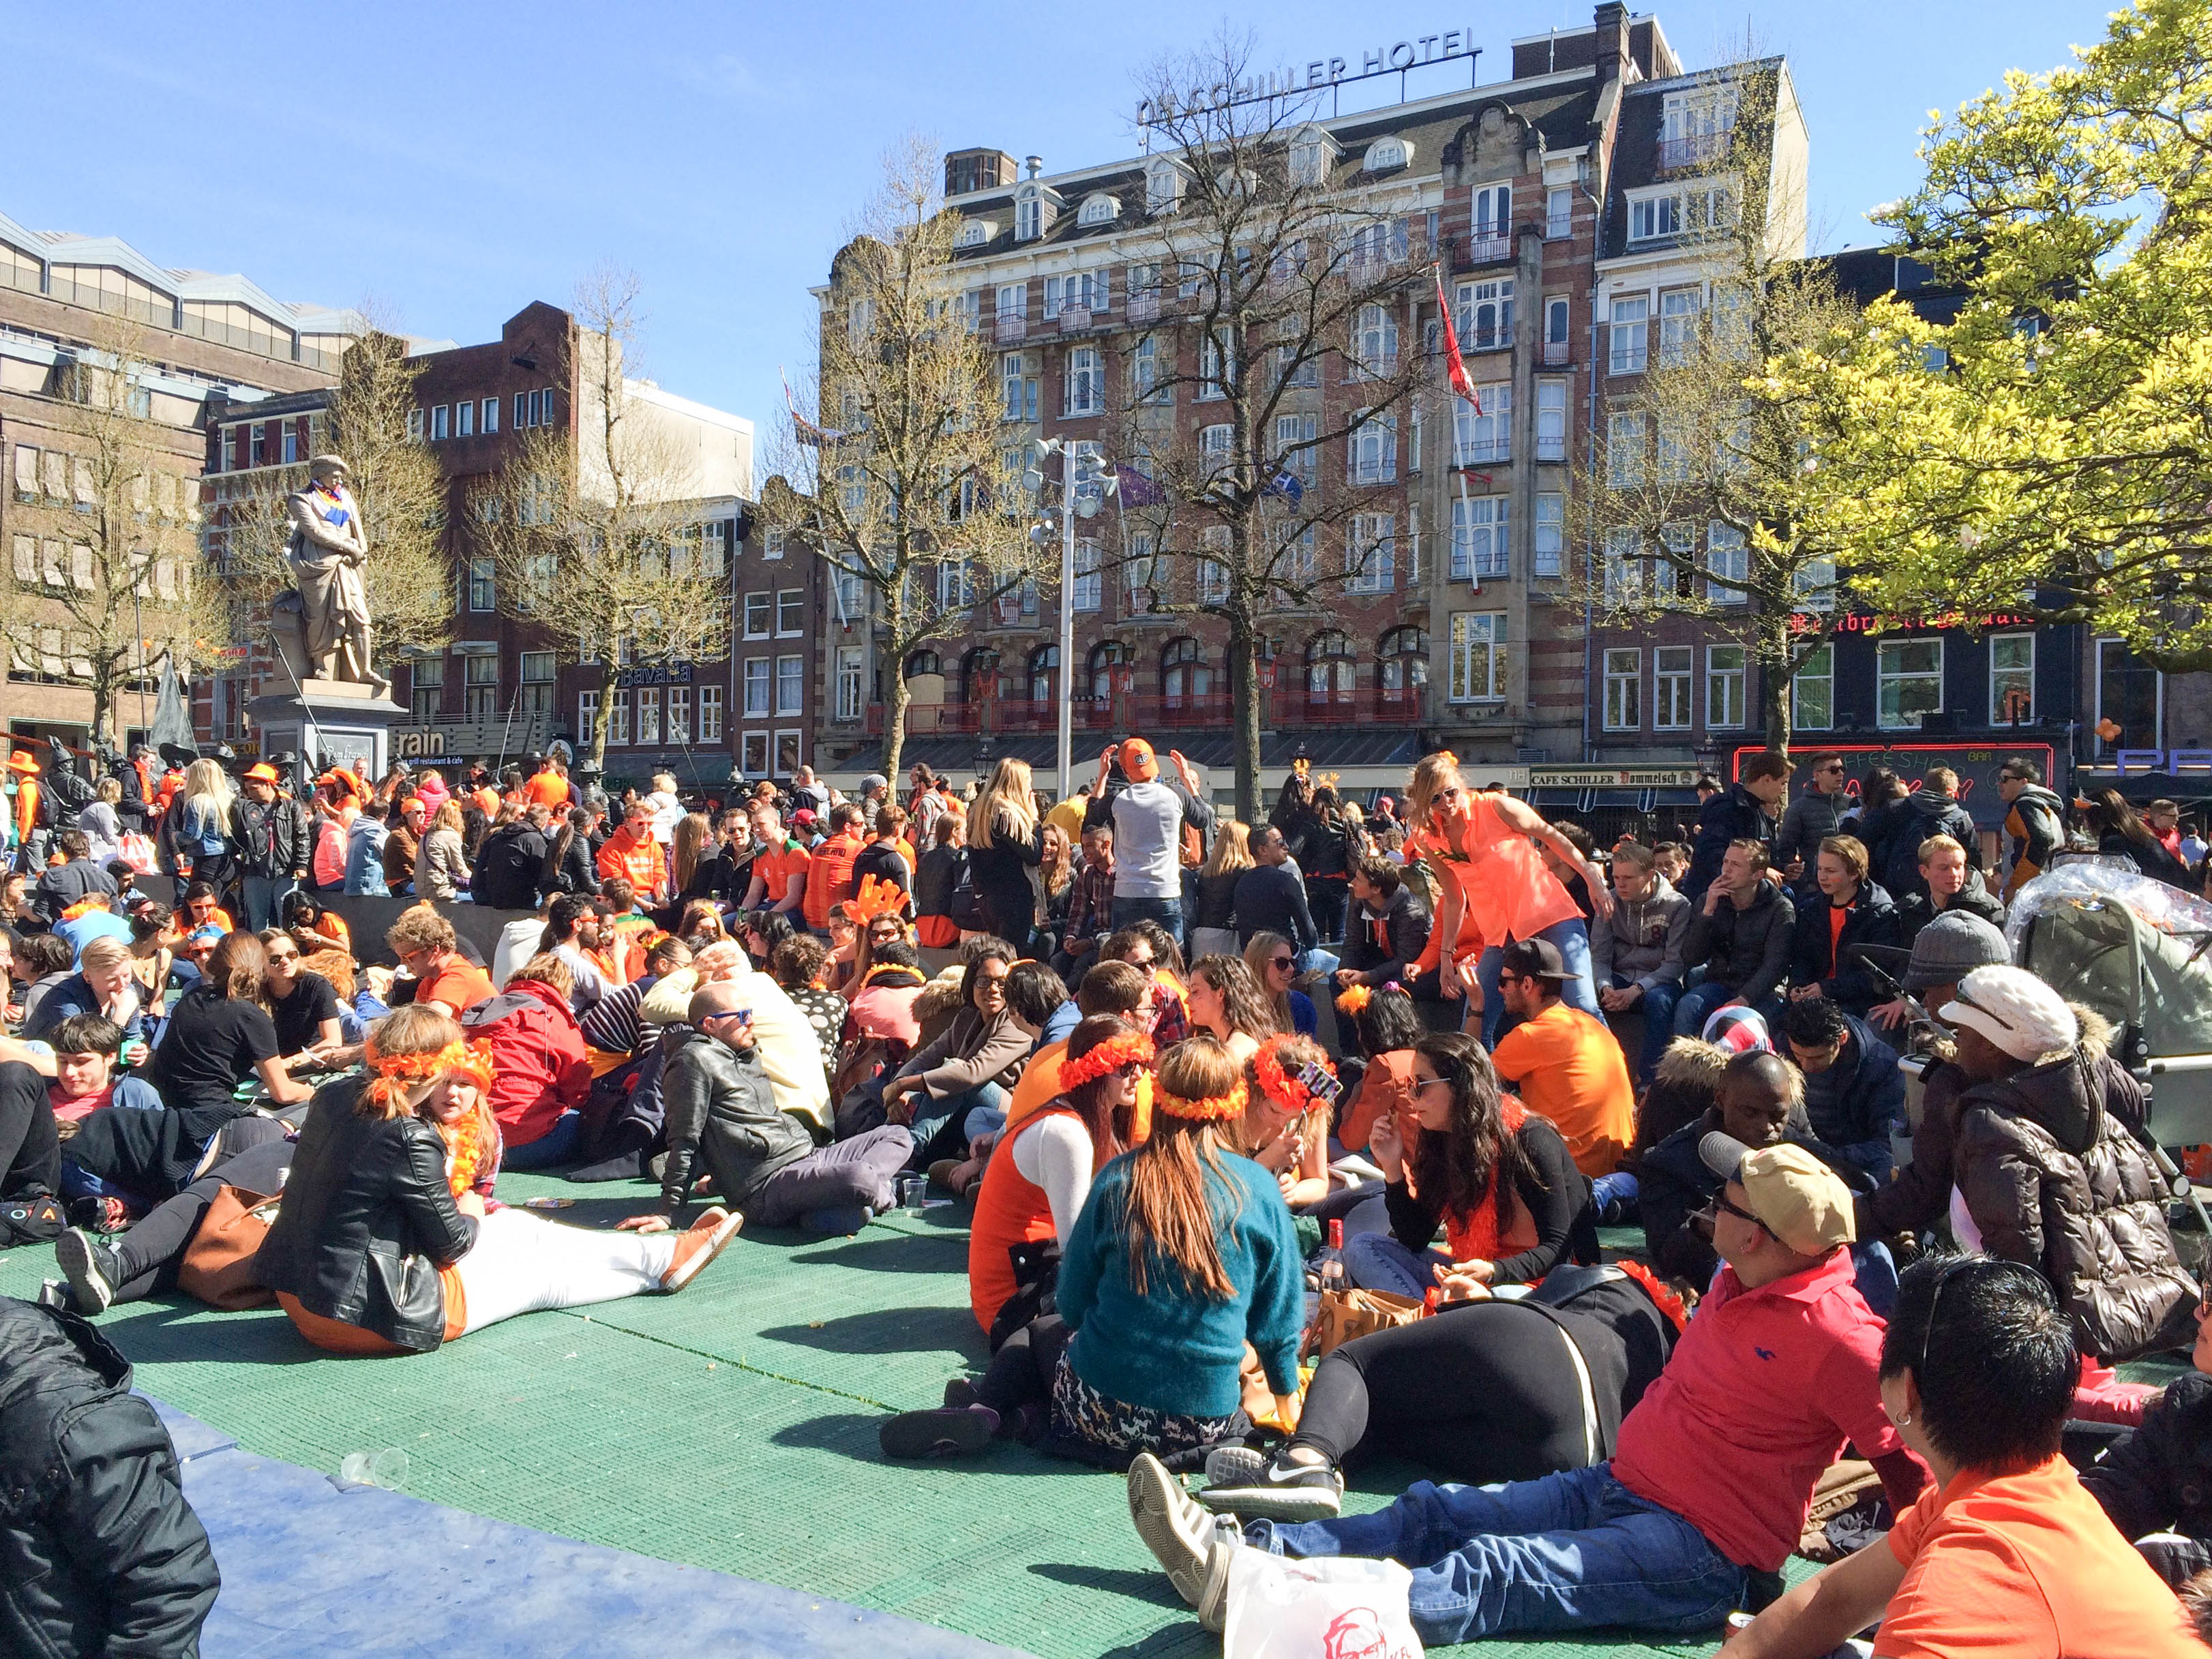 Rembrandtplein in Amsterdam becomes choked with people as tourists from all over the world descend up on the capital of the Netherlands to celebrate King Willem Alexander's birthday on Koningsdag